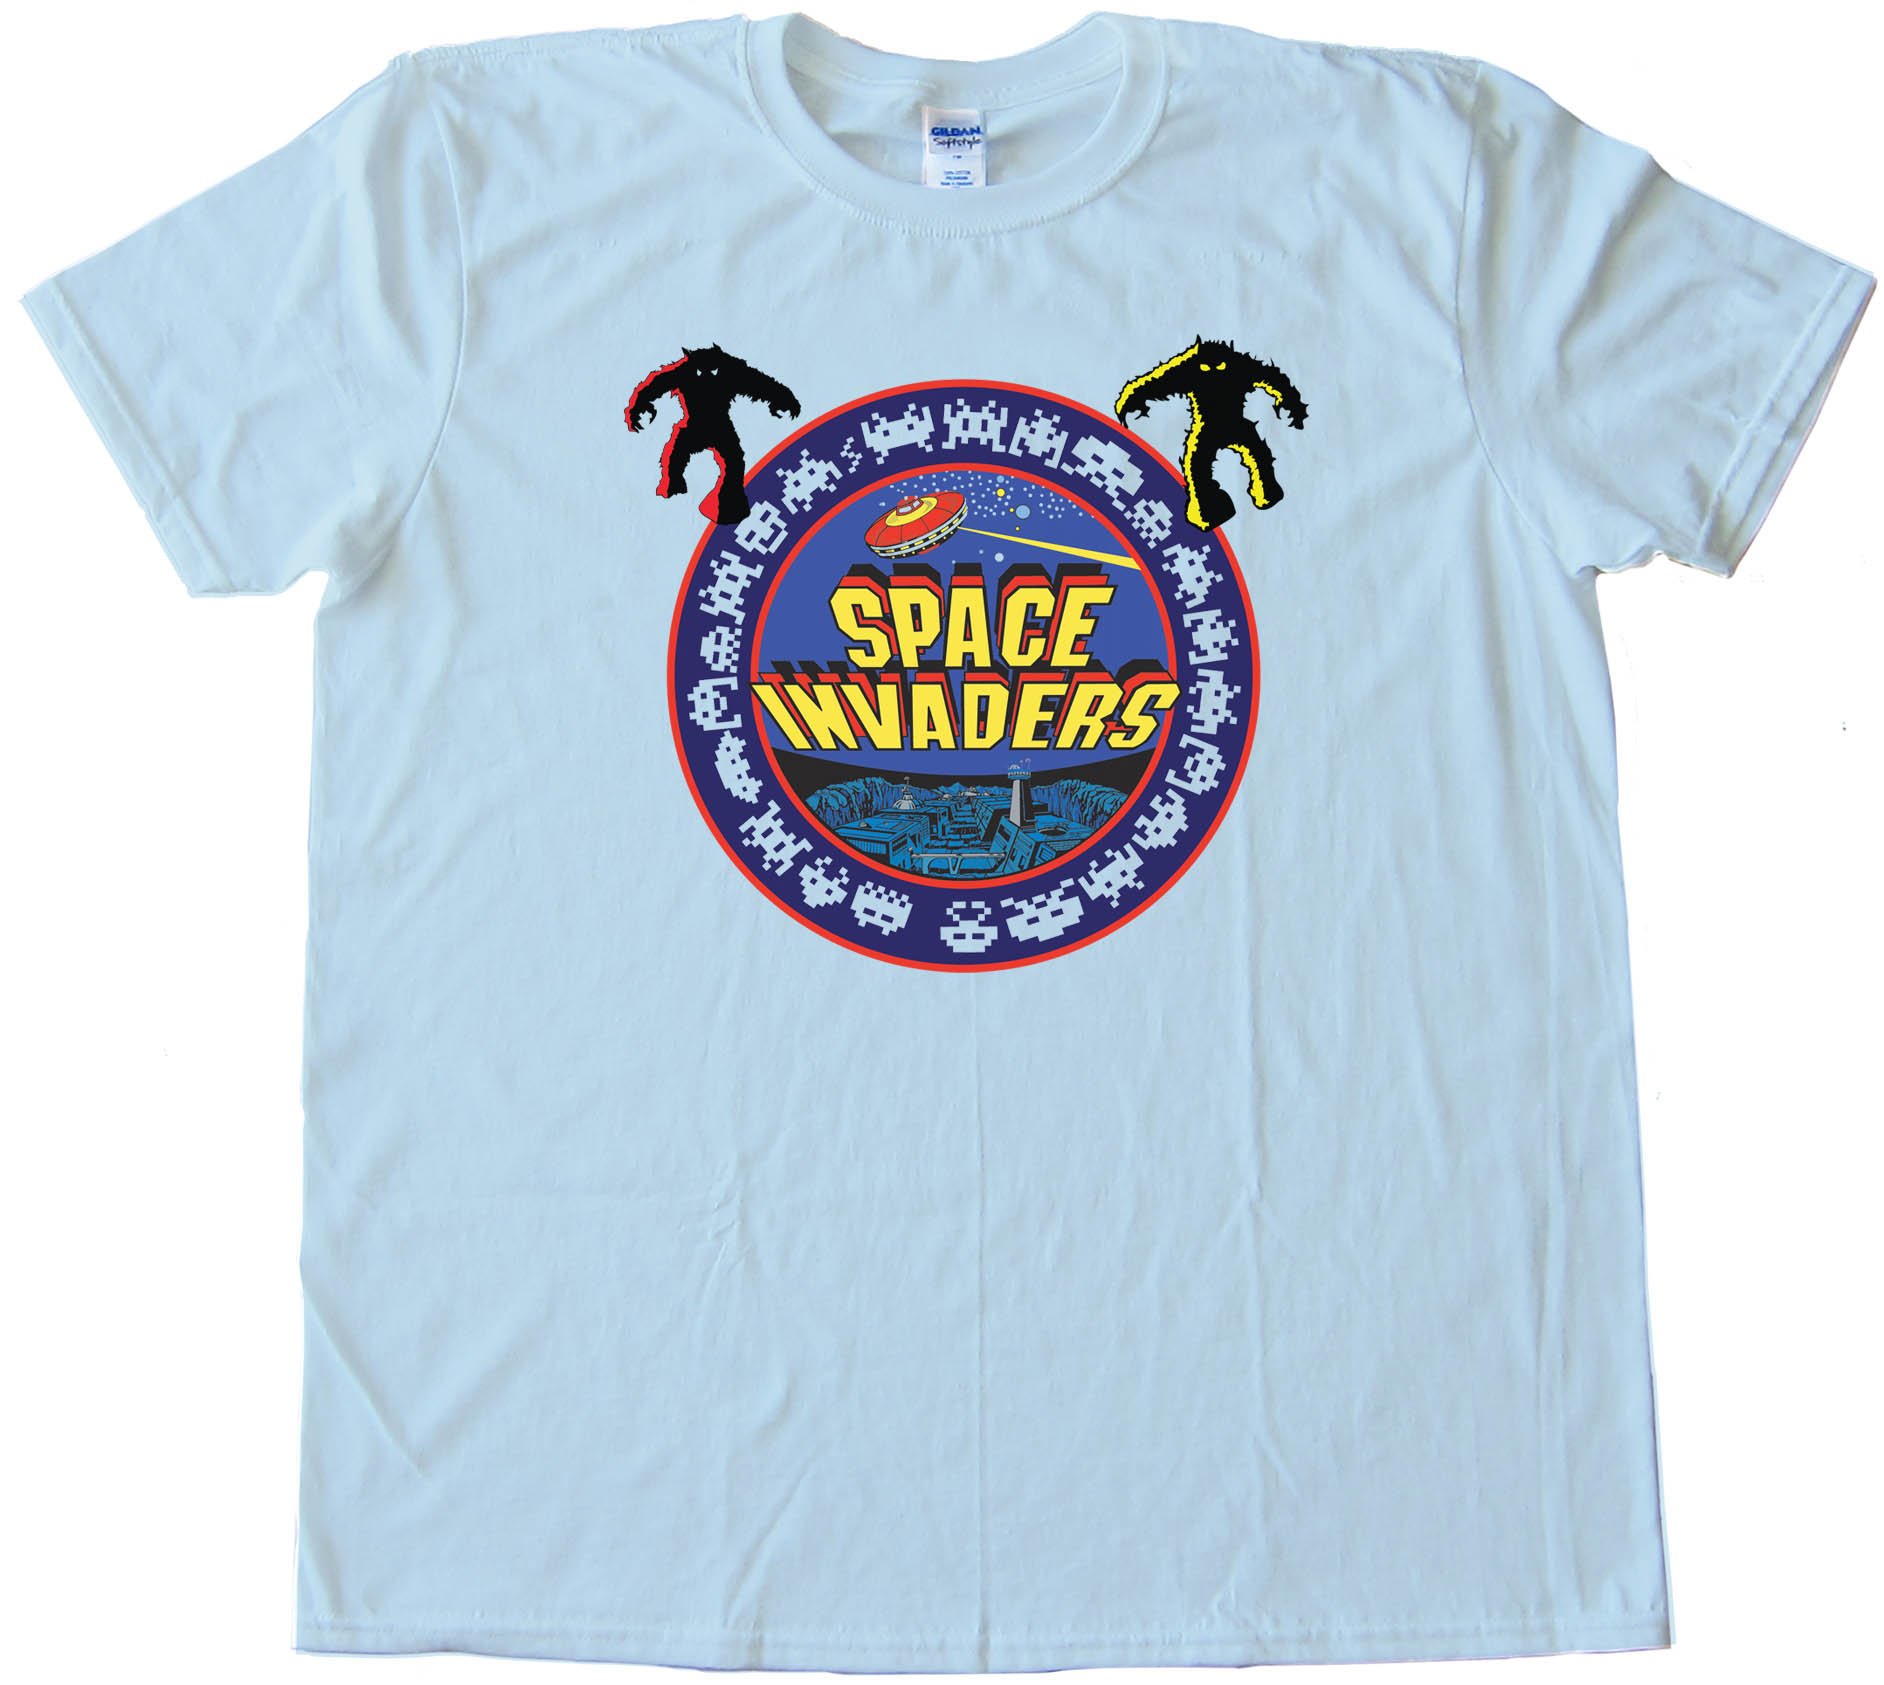 1978 Space Invaders Bally Midway Classic Video Gamer - Tee Shirt